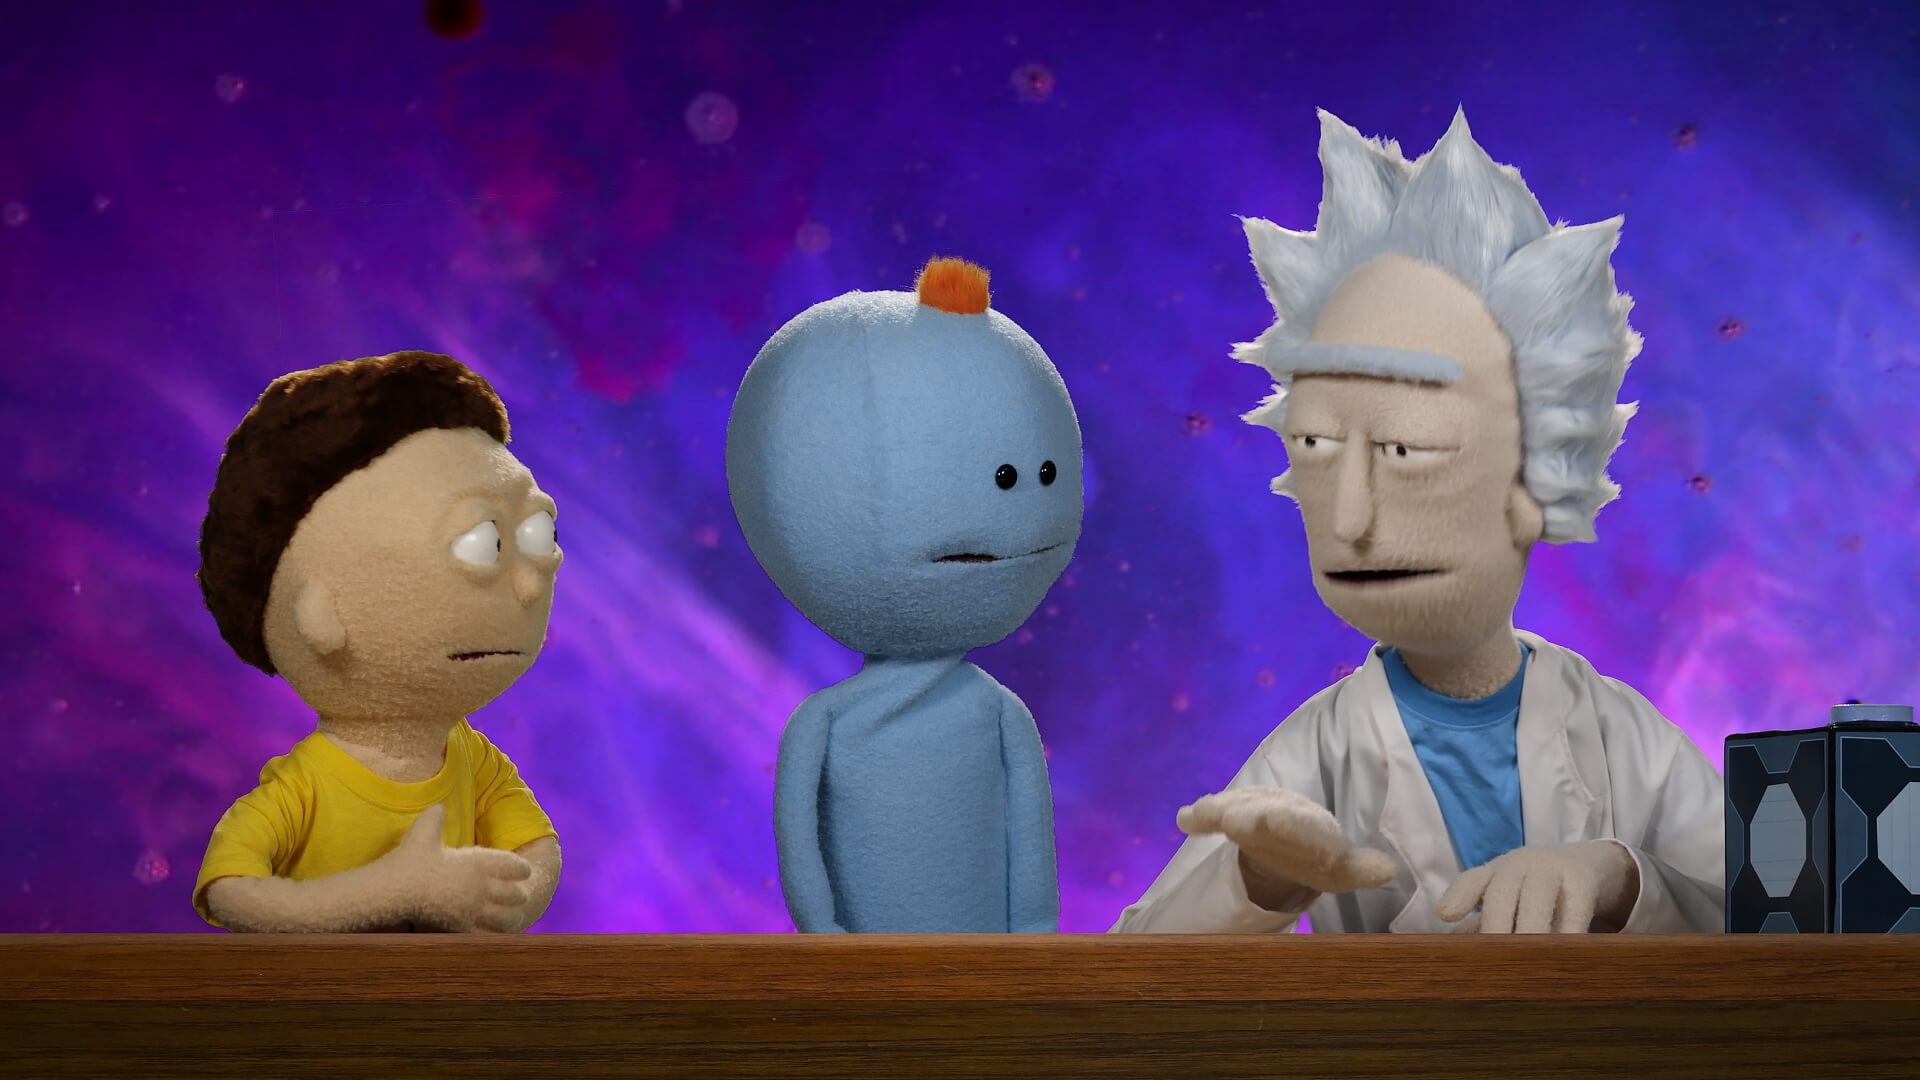 Rick and Morty puppets from the Rick and Morty Blu-ray commercial shot and edited by Todd Bishop